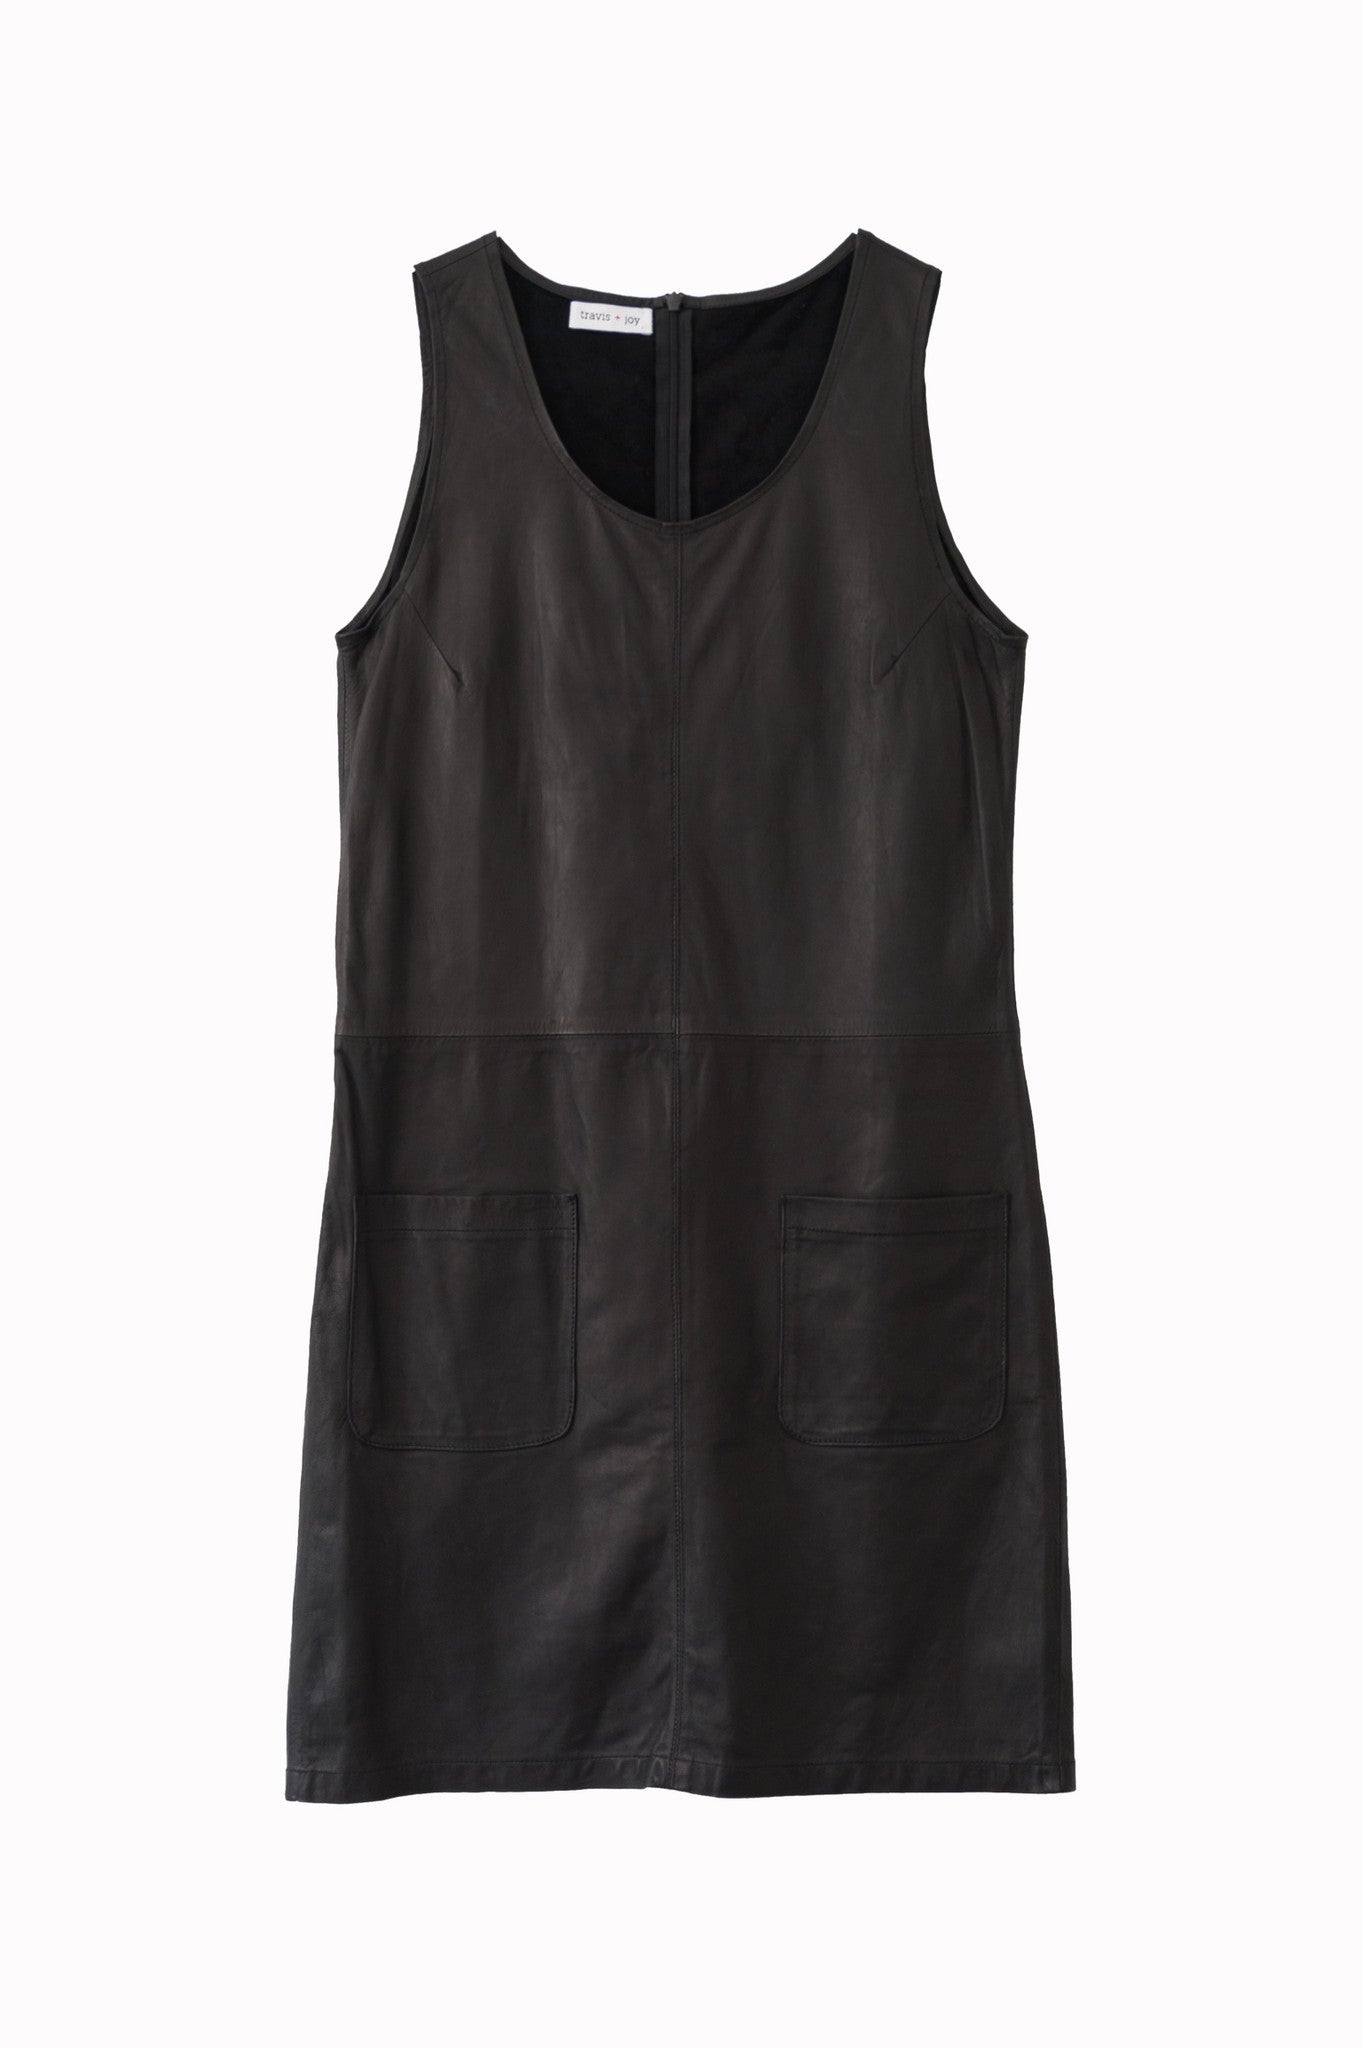 soft leather sleeveless shift dress available in black. 100% authentic leather